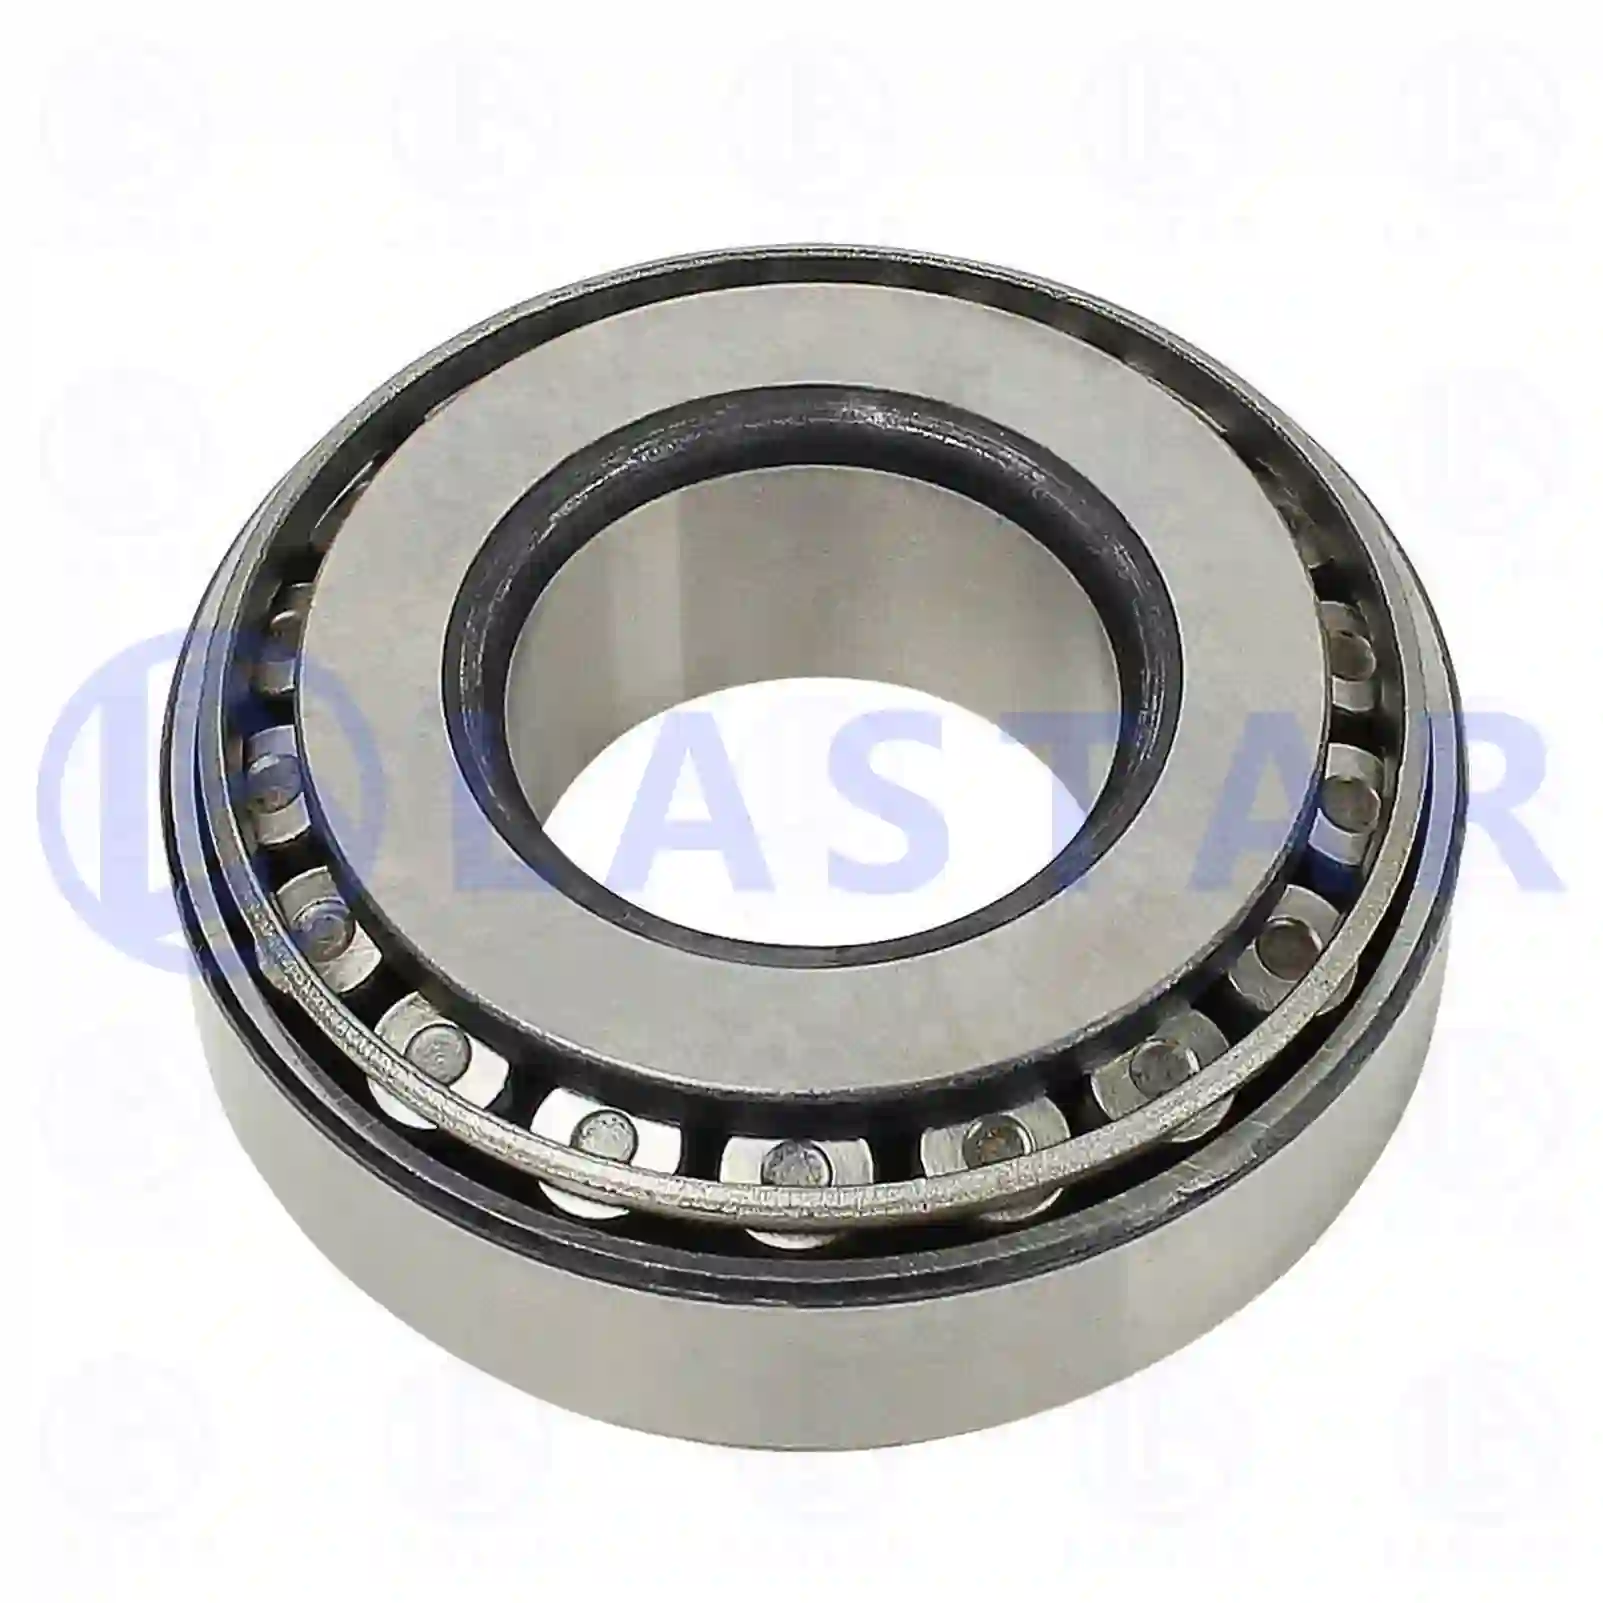 Tapered roller bearing, 77730851, 8124026, 291525251, 1487681, 4746603, 5135673AA, 1496374, 9413166, 9413168, 01905023, 07162215, 42471125, 607180, 082127141A, 0009816005, 0019806902, 0019810005, 0059812405, 0059812505, 183405, 7183405, 291525251, 7169273 ||  77730851 Lastar Spare Part | Truck Spare Parts, Auotomotive Spare Parts Tapered roller bearing, 77730851, 8124026, 291525251, 1487681, 4746603, 5135673AA, 1496374, 9413166, 9413168, 01905023, 07162215, 42471125, 607180, 082127141A, 0009816005, 0019806902, 0019810005, 0059812405, 0059812505, 183405, 7183405, 291525251, 7169273 ||  77730851 Lastar Spare Part | Truck Spare Parts, Auotomotive Spare Parts